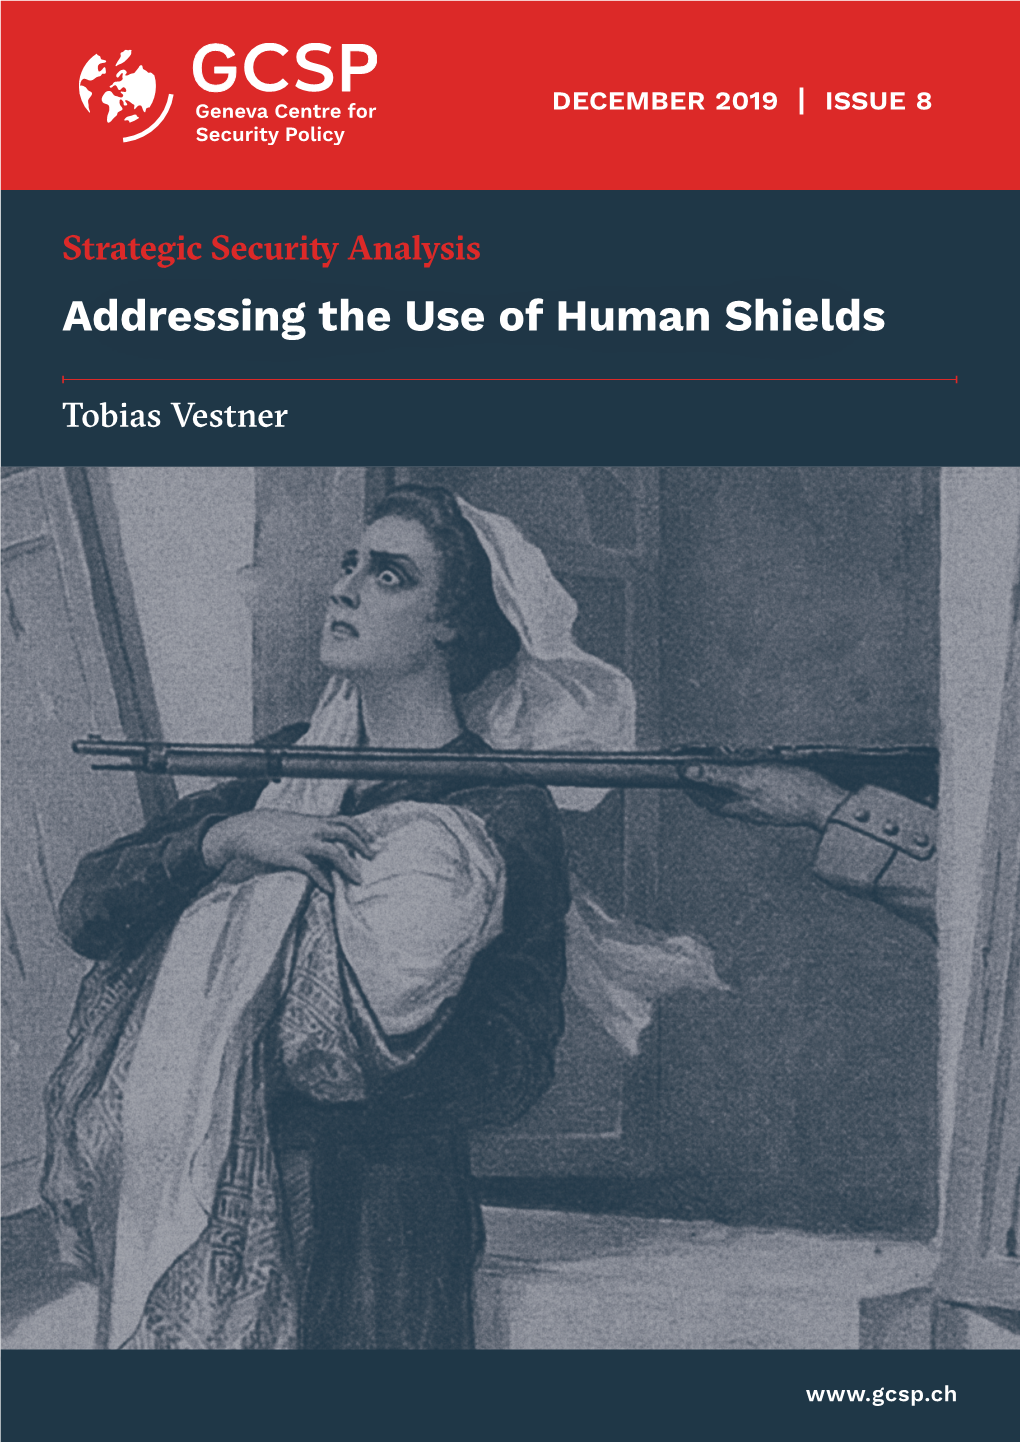 Addressing the Use of Human Shields